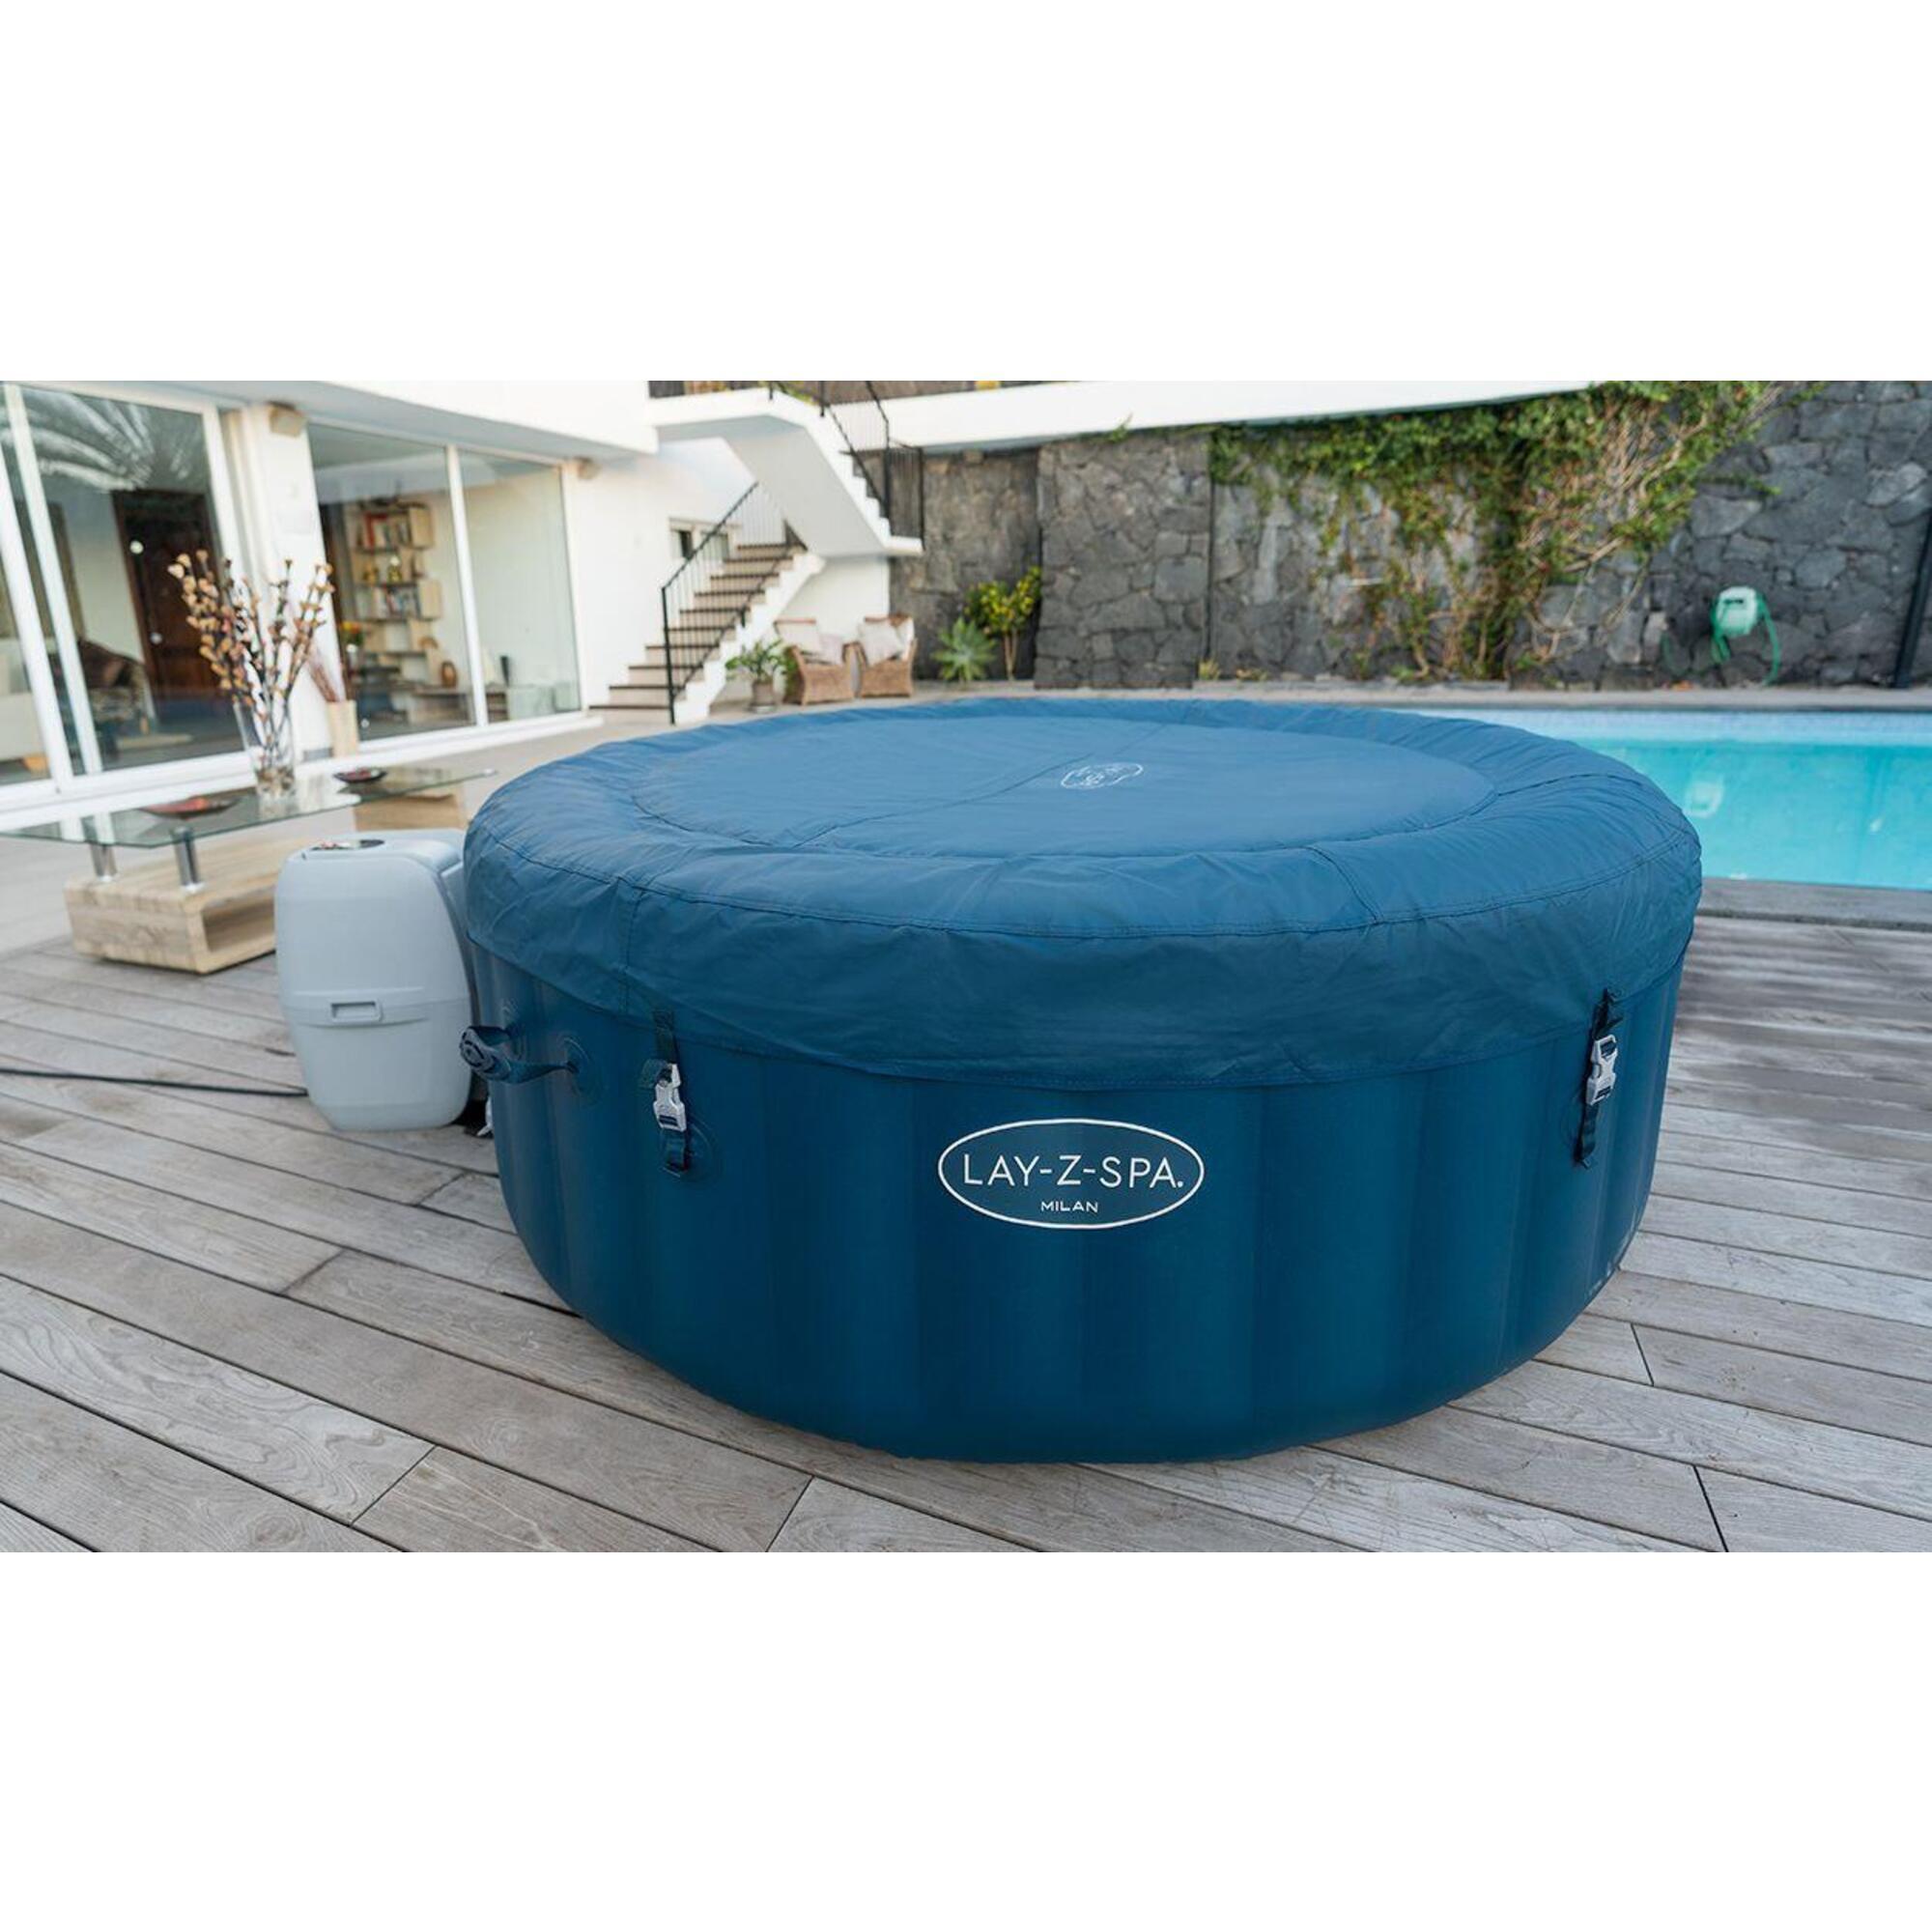 Lay-Z-Spa Milan Airjet PLUS Inflatable Hot Tub 3/5